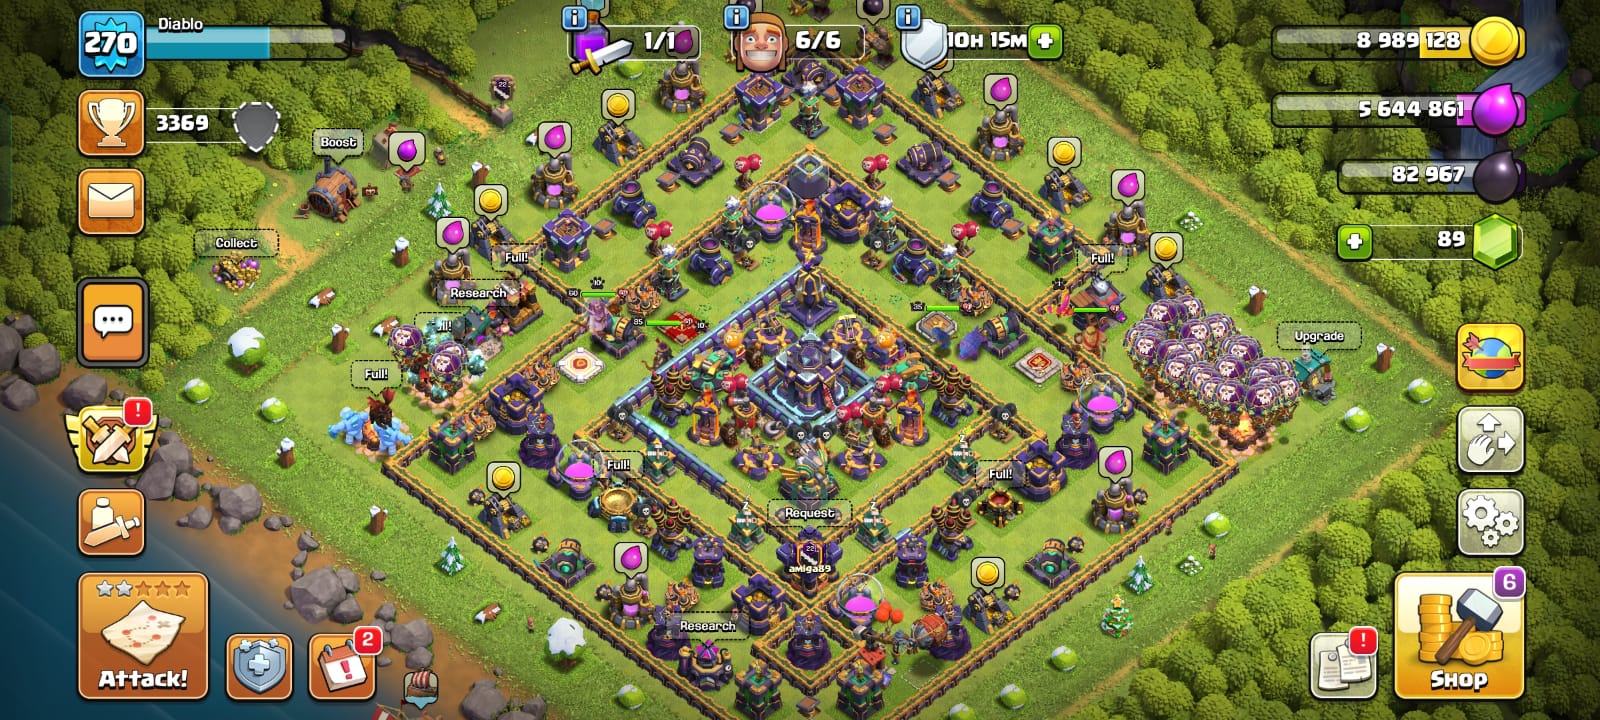 [80% MAXED TH15],[6 DIFFERENT SKINS],[4 SCENARIES],[270 XP LEVEL],[MAXED HEROES]